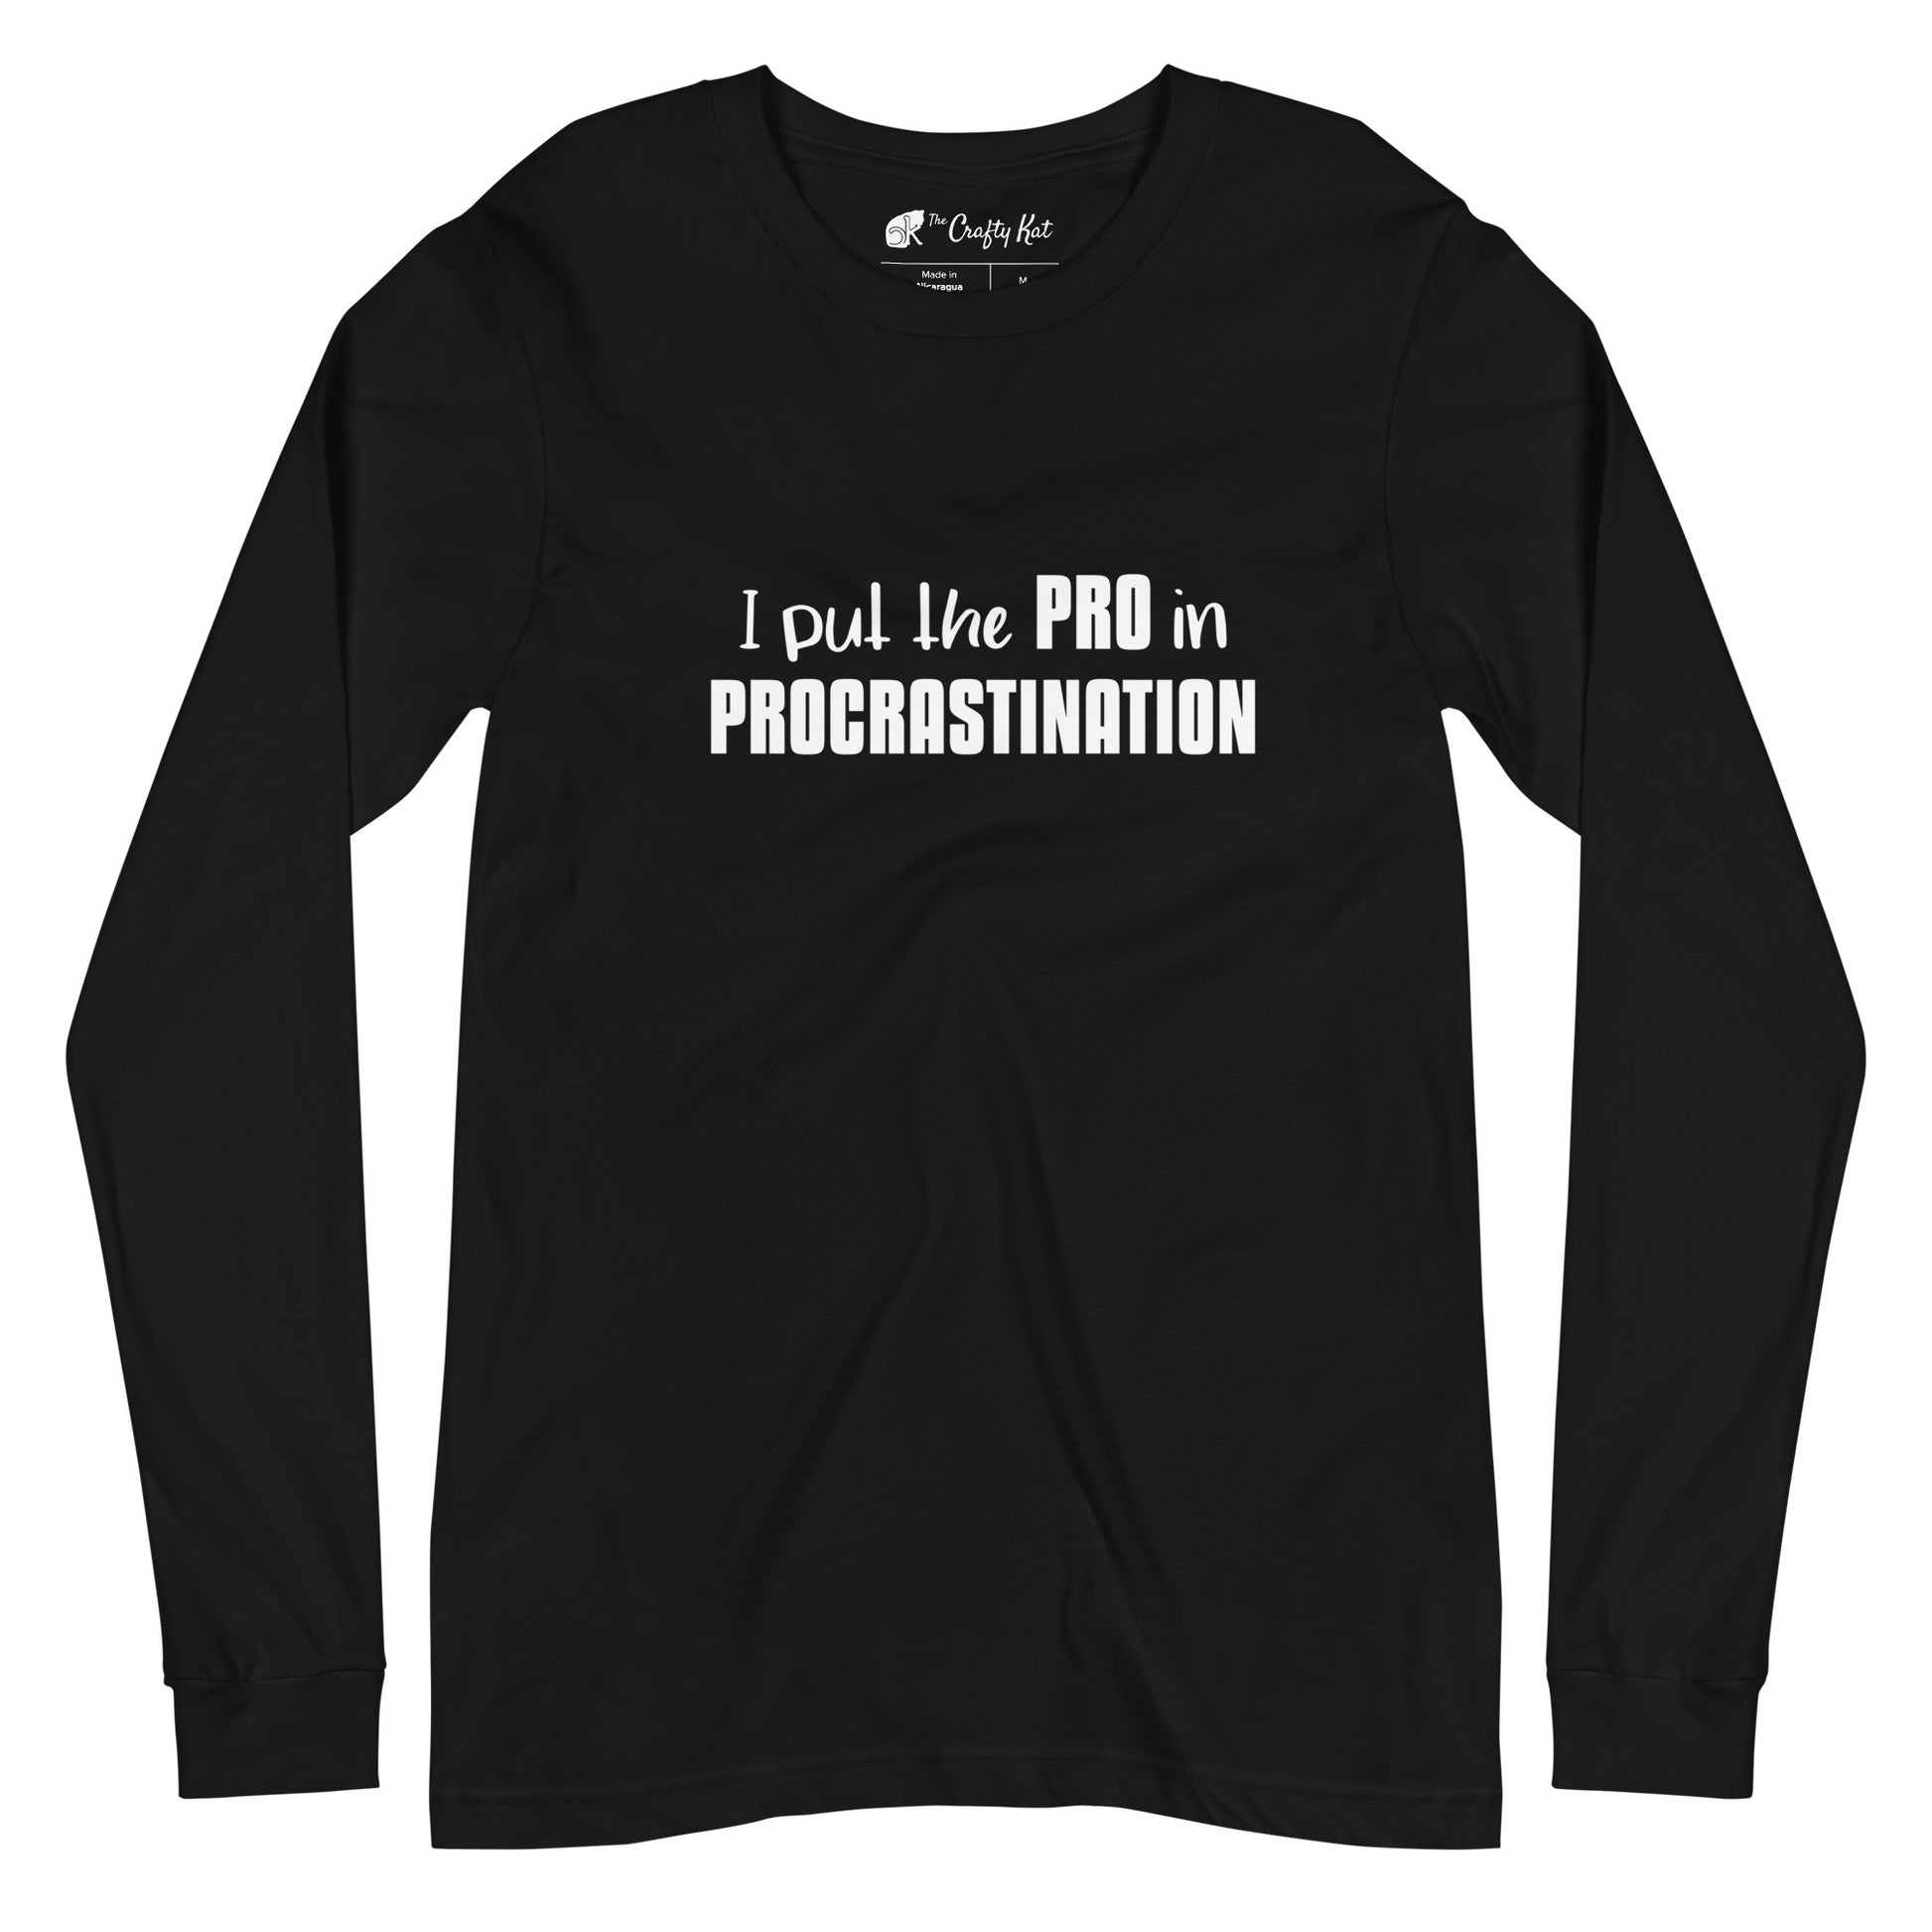 Black long-sleeve shirt with text graphic: "I put the PRO in PROCRASTINATION"